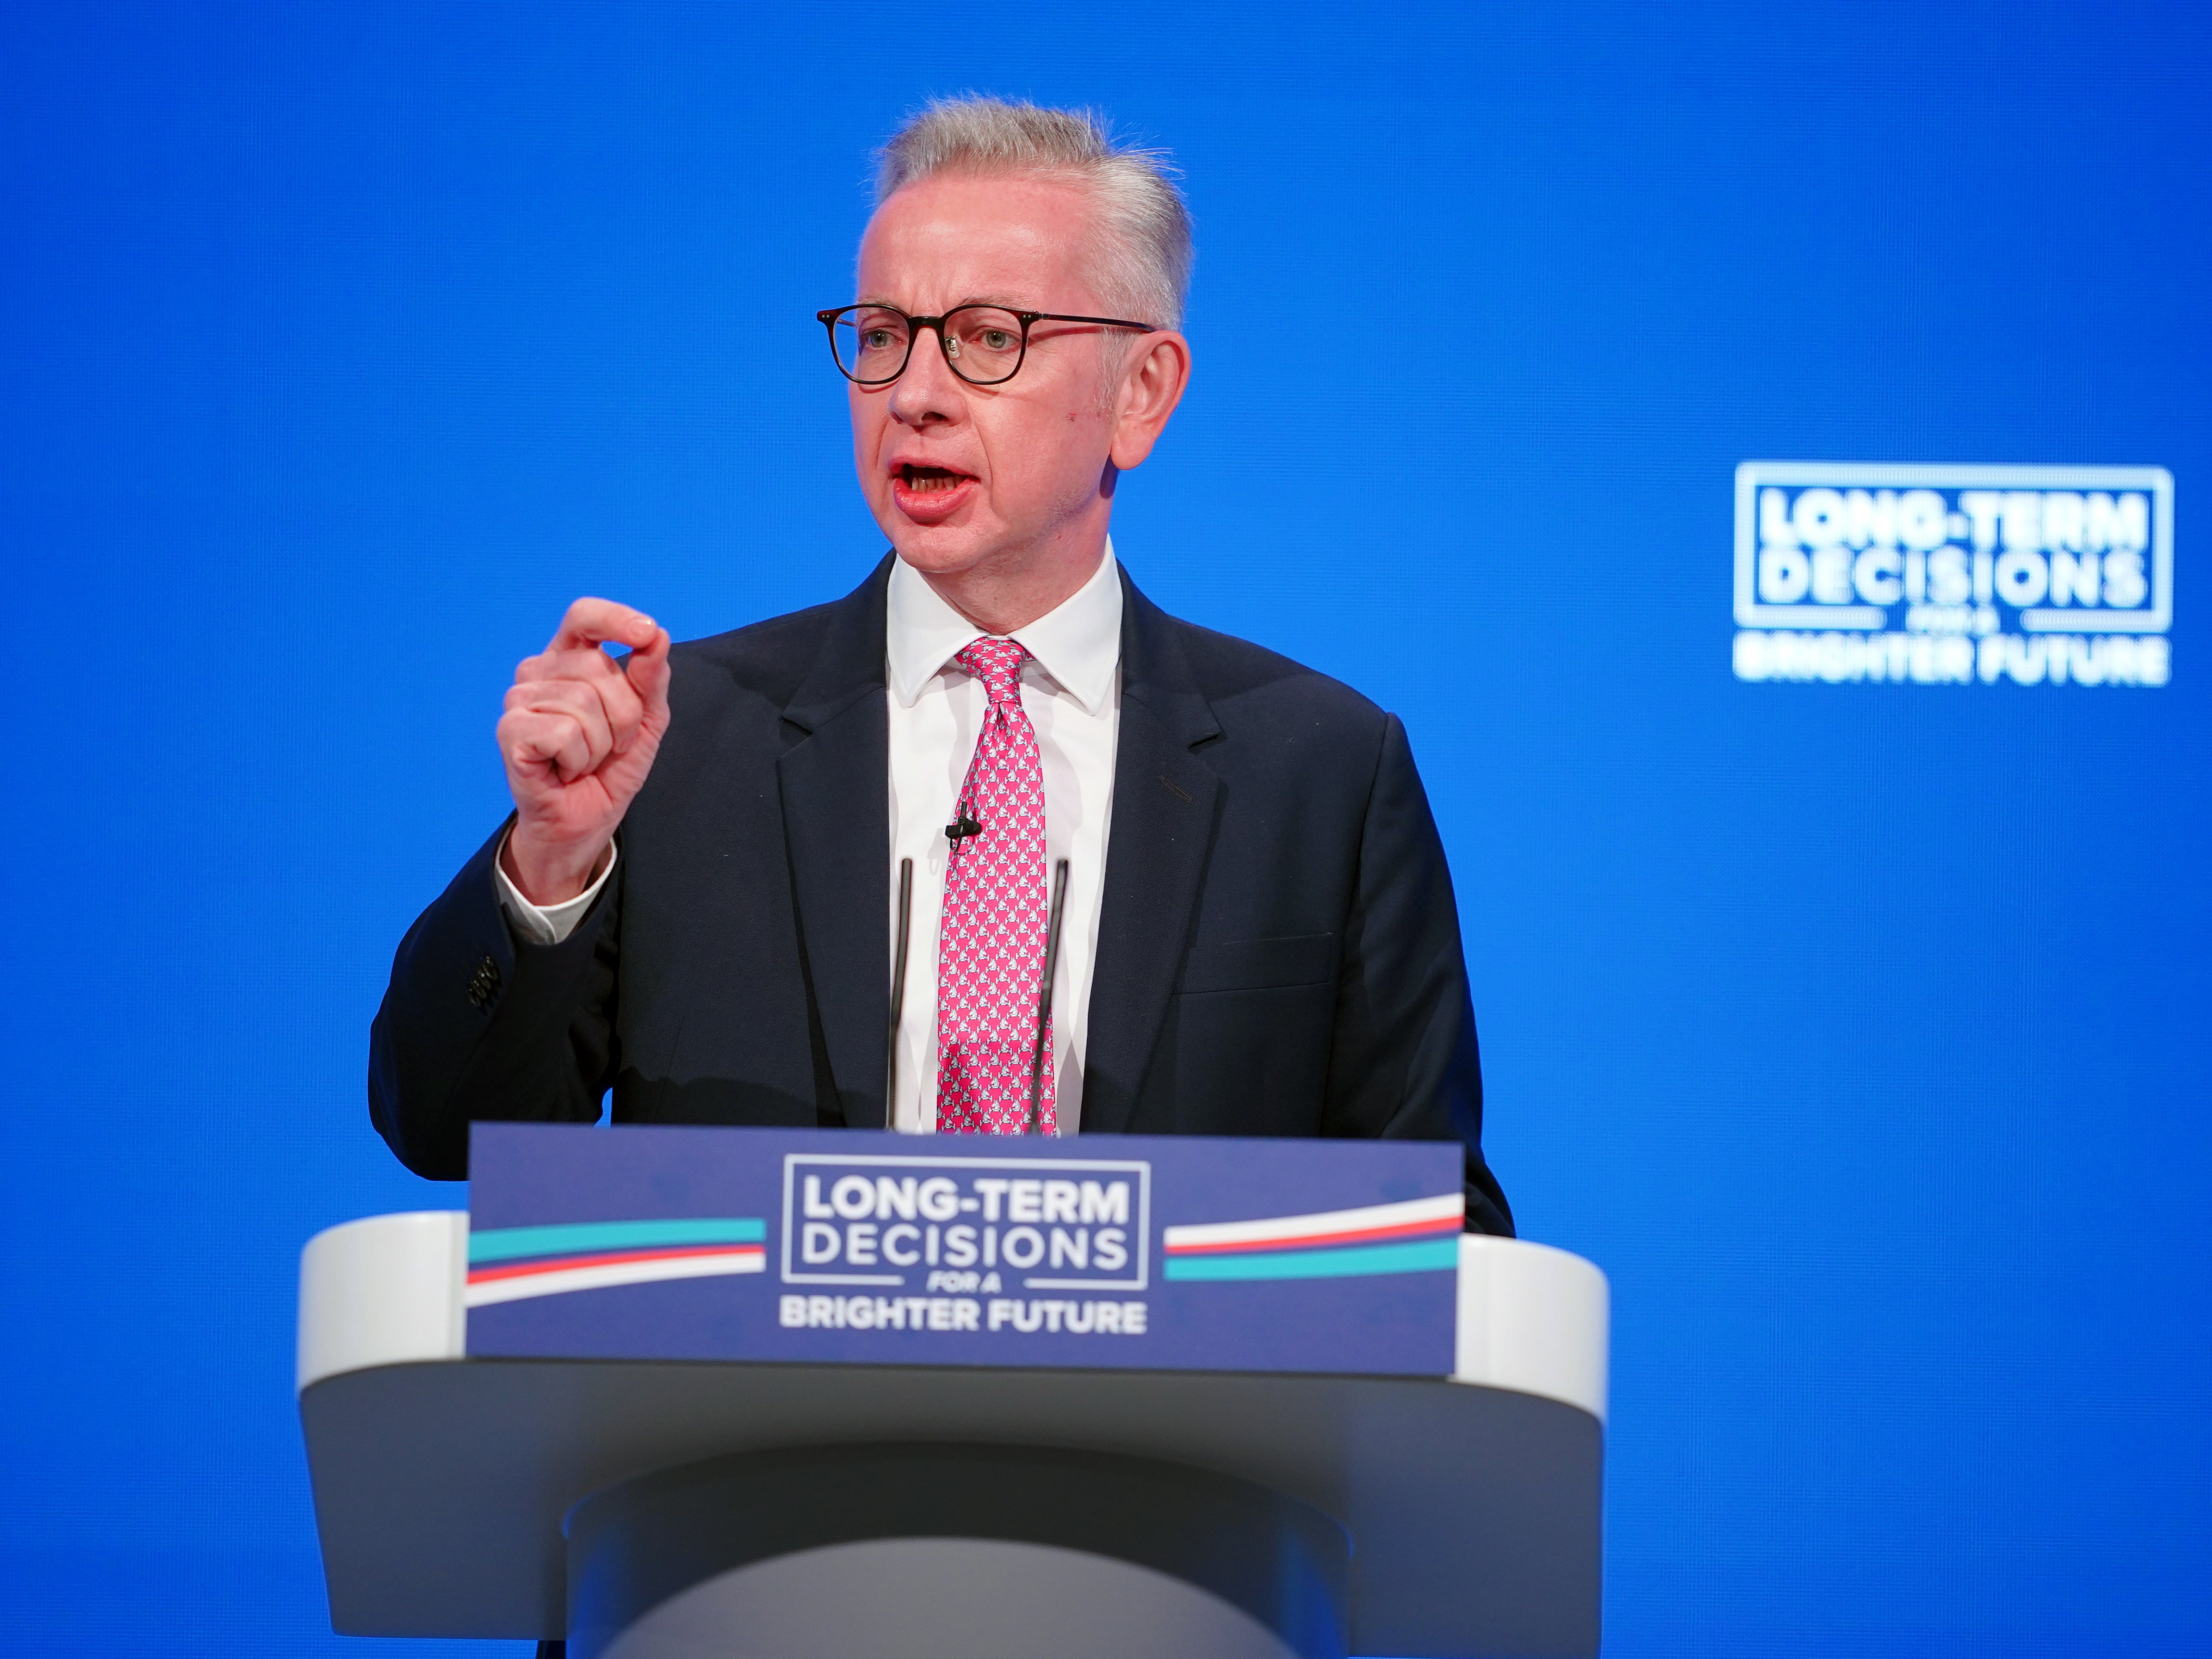 Michael Gove’s department is looking at changes to extremism definition